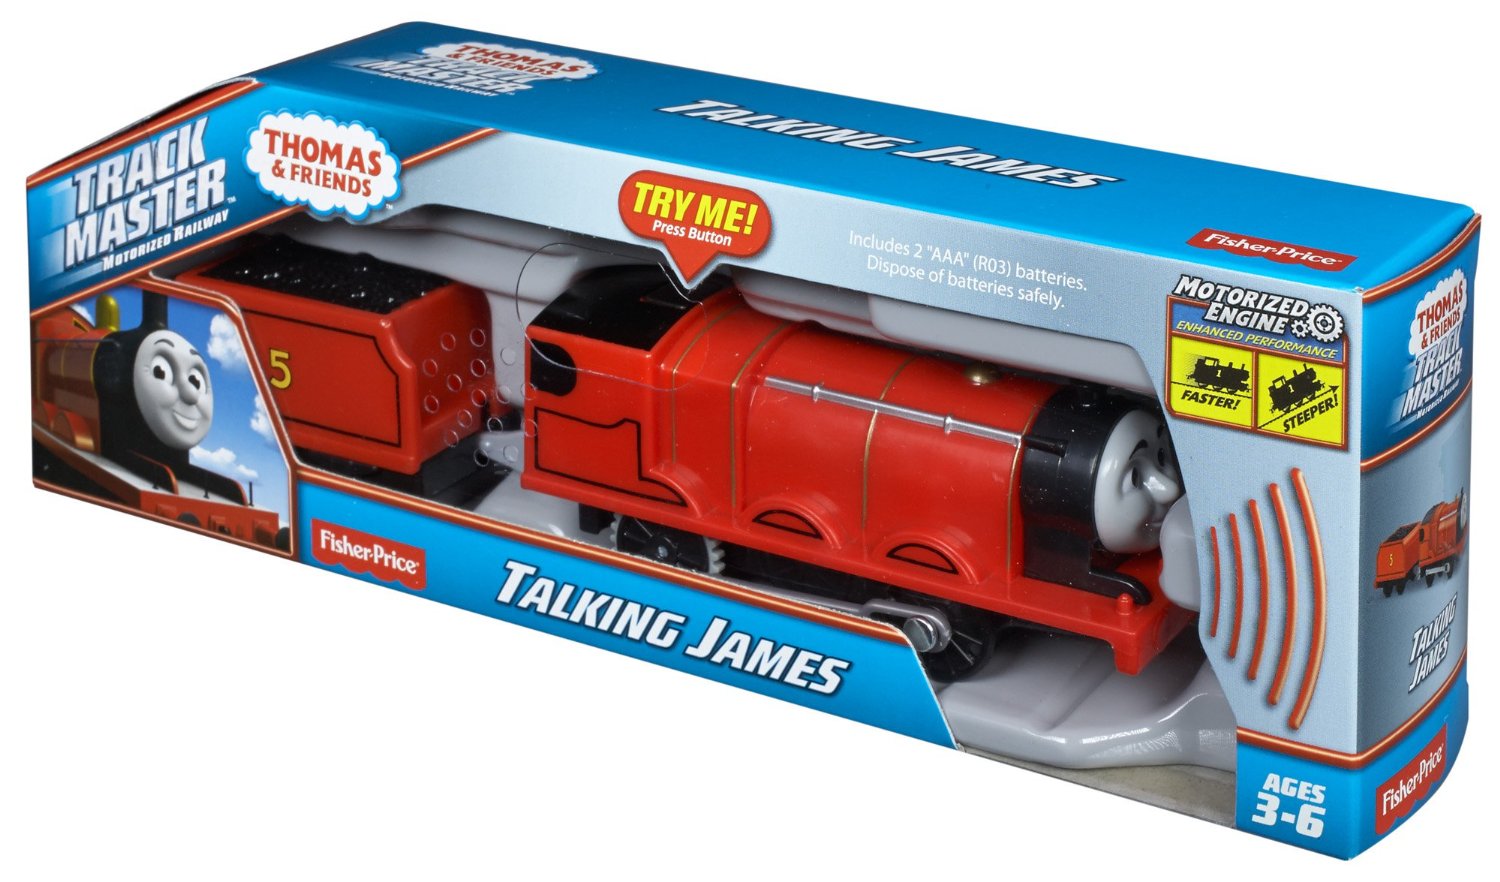 Thomas and friends Trackmaster Джеймс